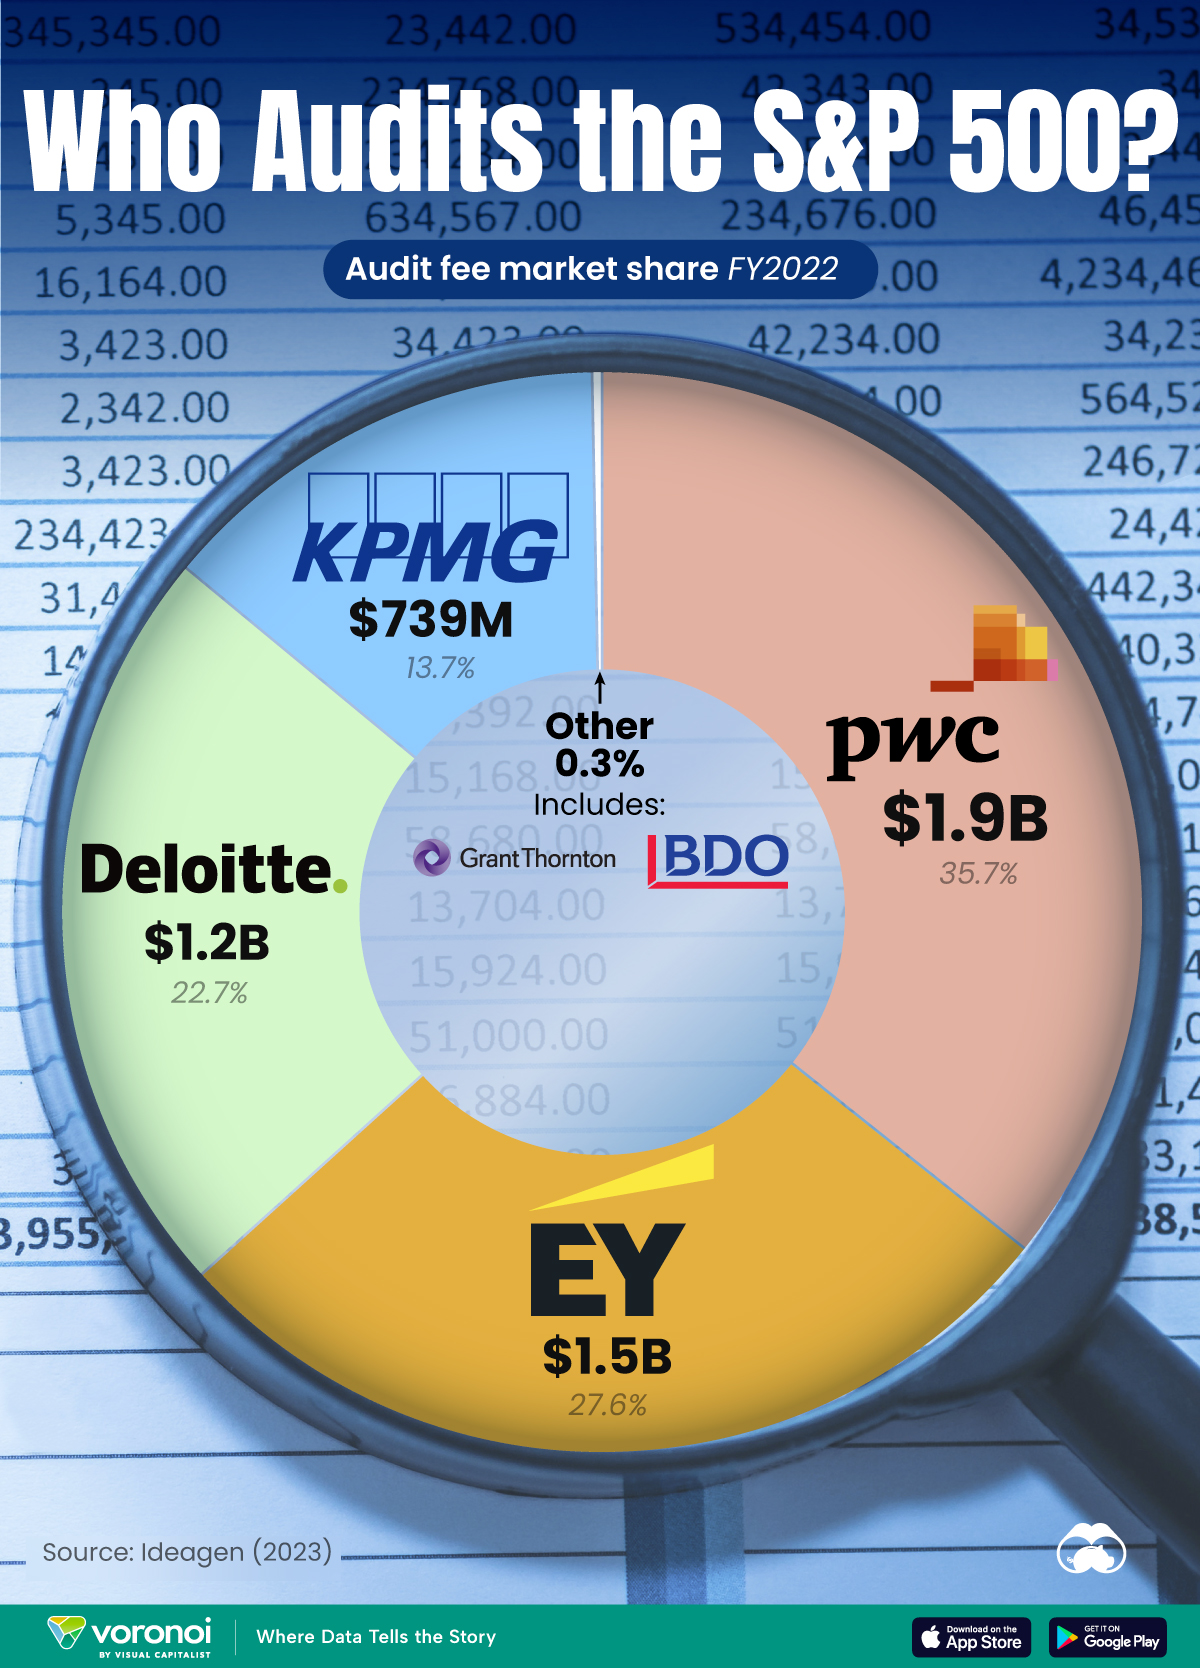 A pie chart, breaking down the audit fees market share of the firms that audit the S&P 500.